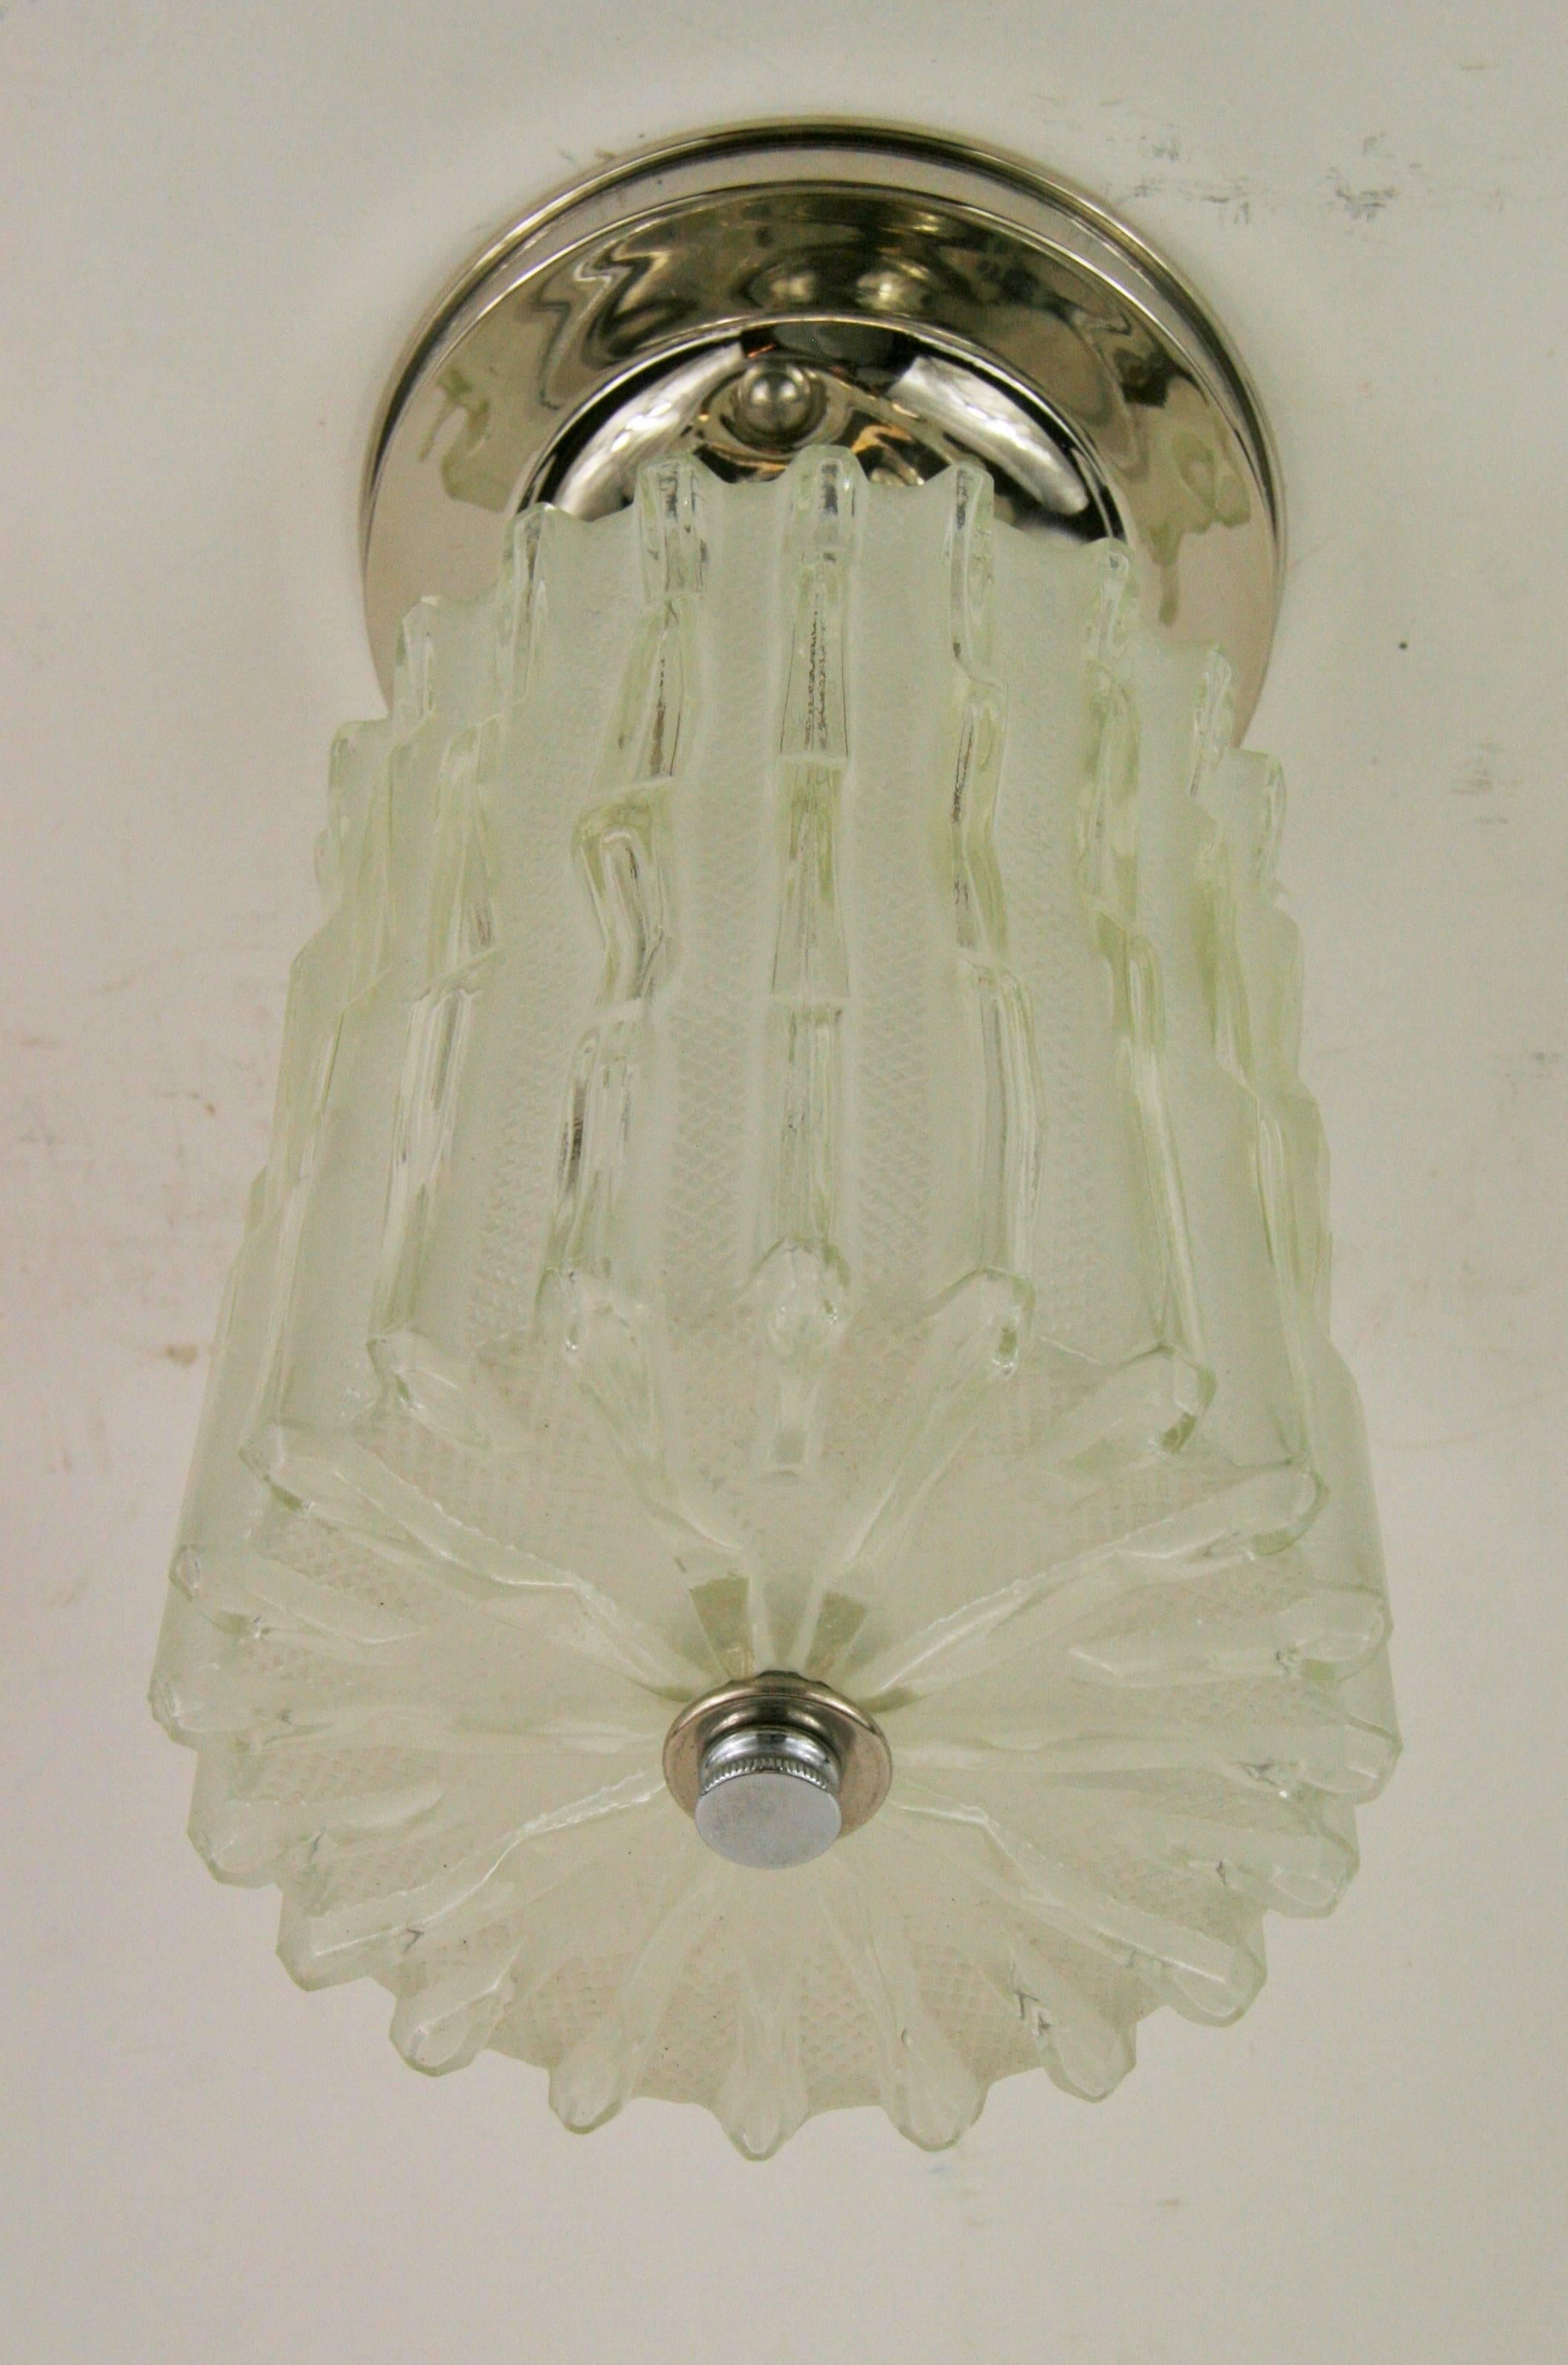 1-4009abcd Murano wavey glass ceiling light
Take 75 watt bulb
5 pieces available 
Priced individually